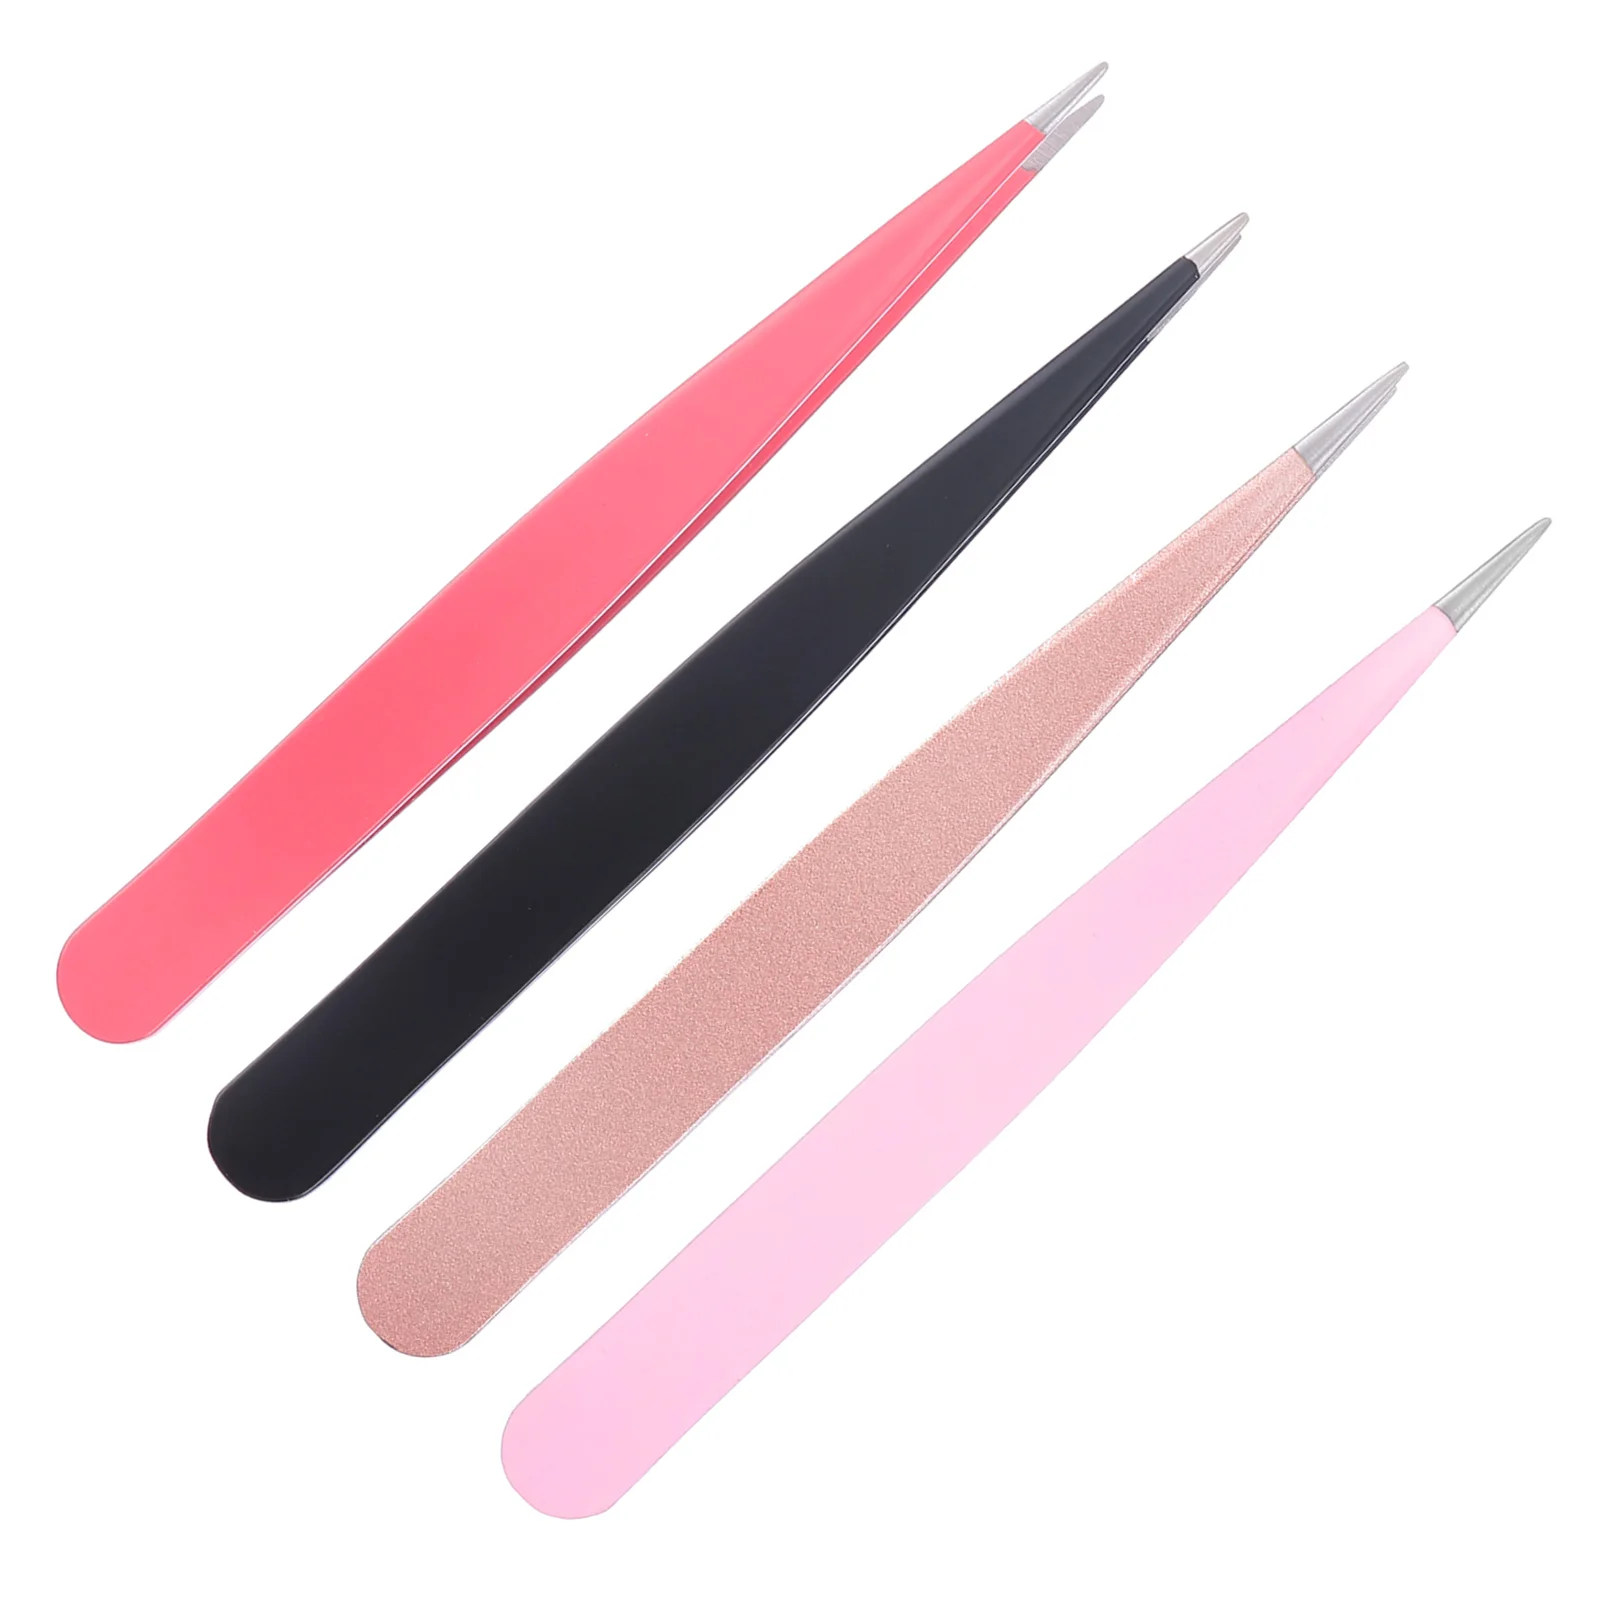 

4 Pcs Colored Eyebrow Clip Lash Tools for Eyelash Extensions Tweezers Stainless Steel